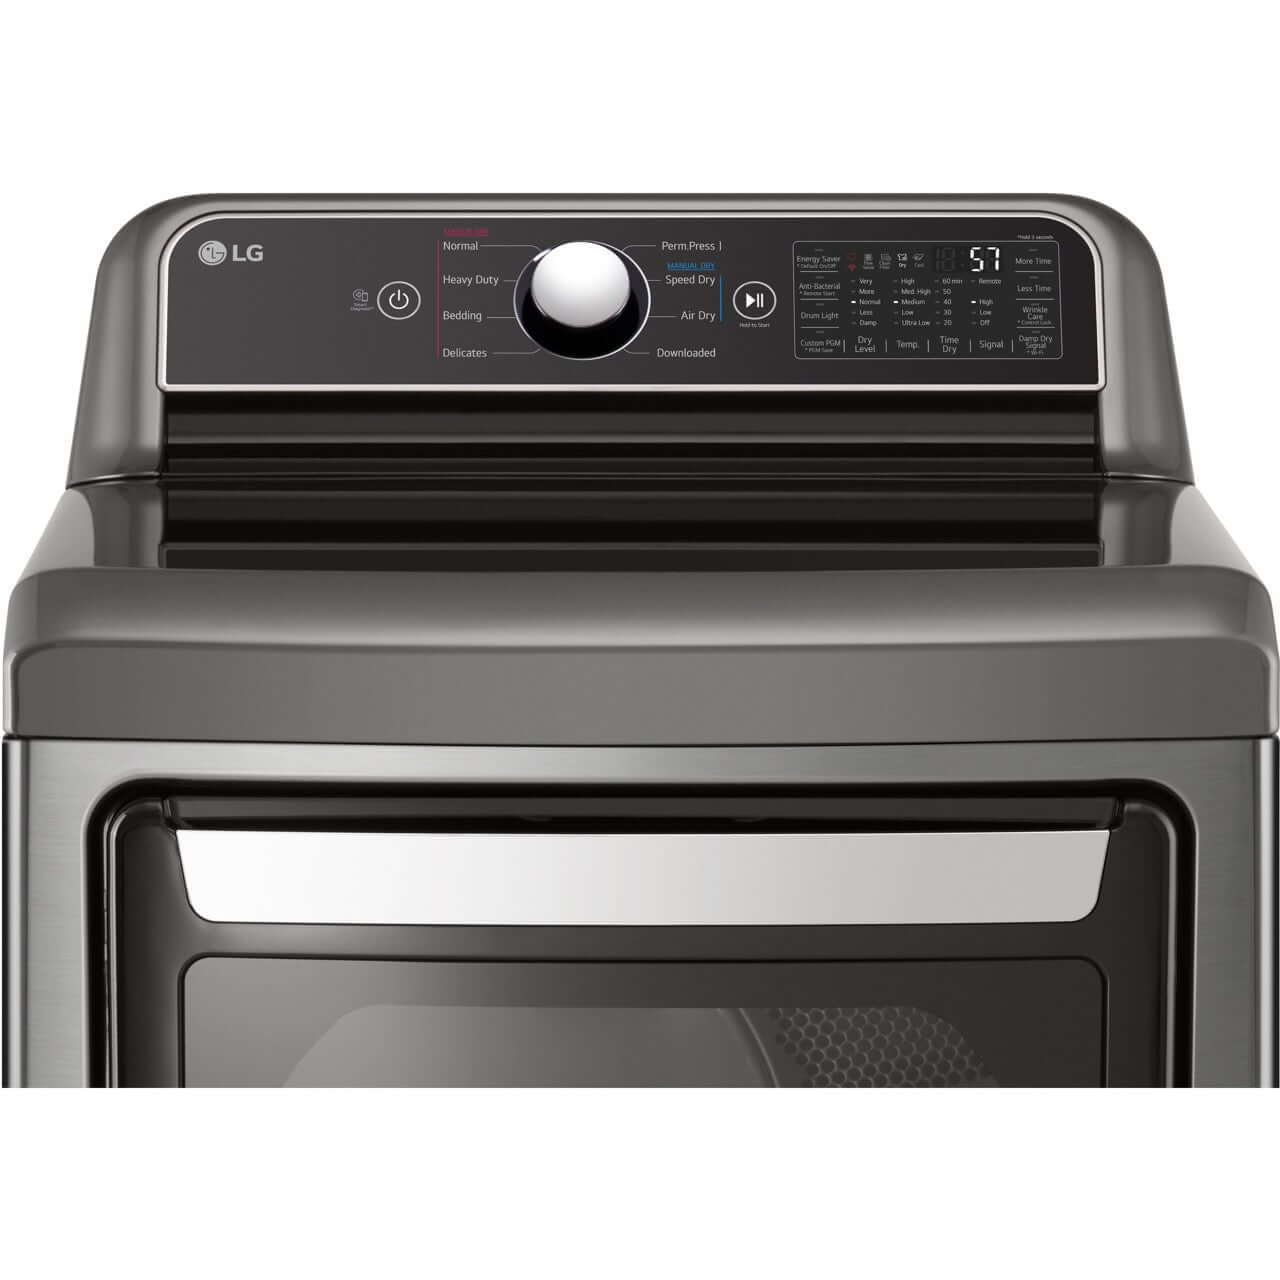 LG 7.3-Cu. Ft. Ultra Large Capacity Smart wi-fi Enabled Rear Control Electric Dryer with EasyLoad Door (DLE7400VE)